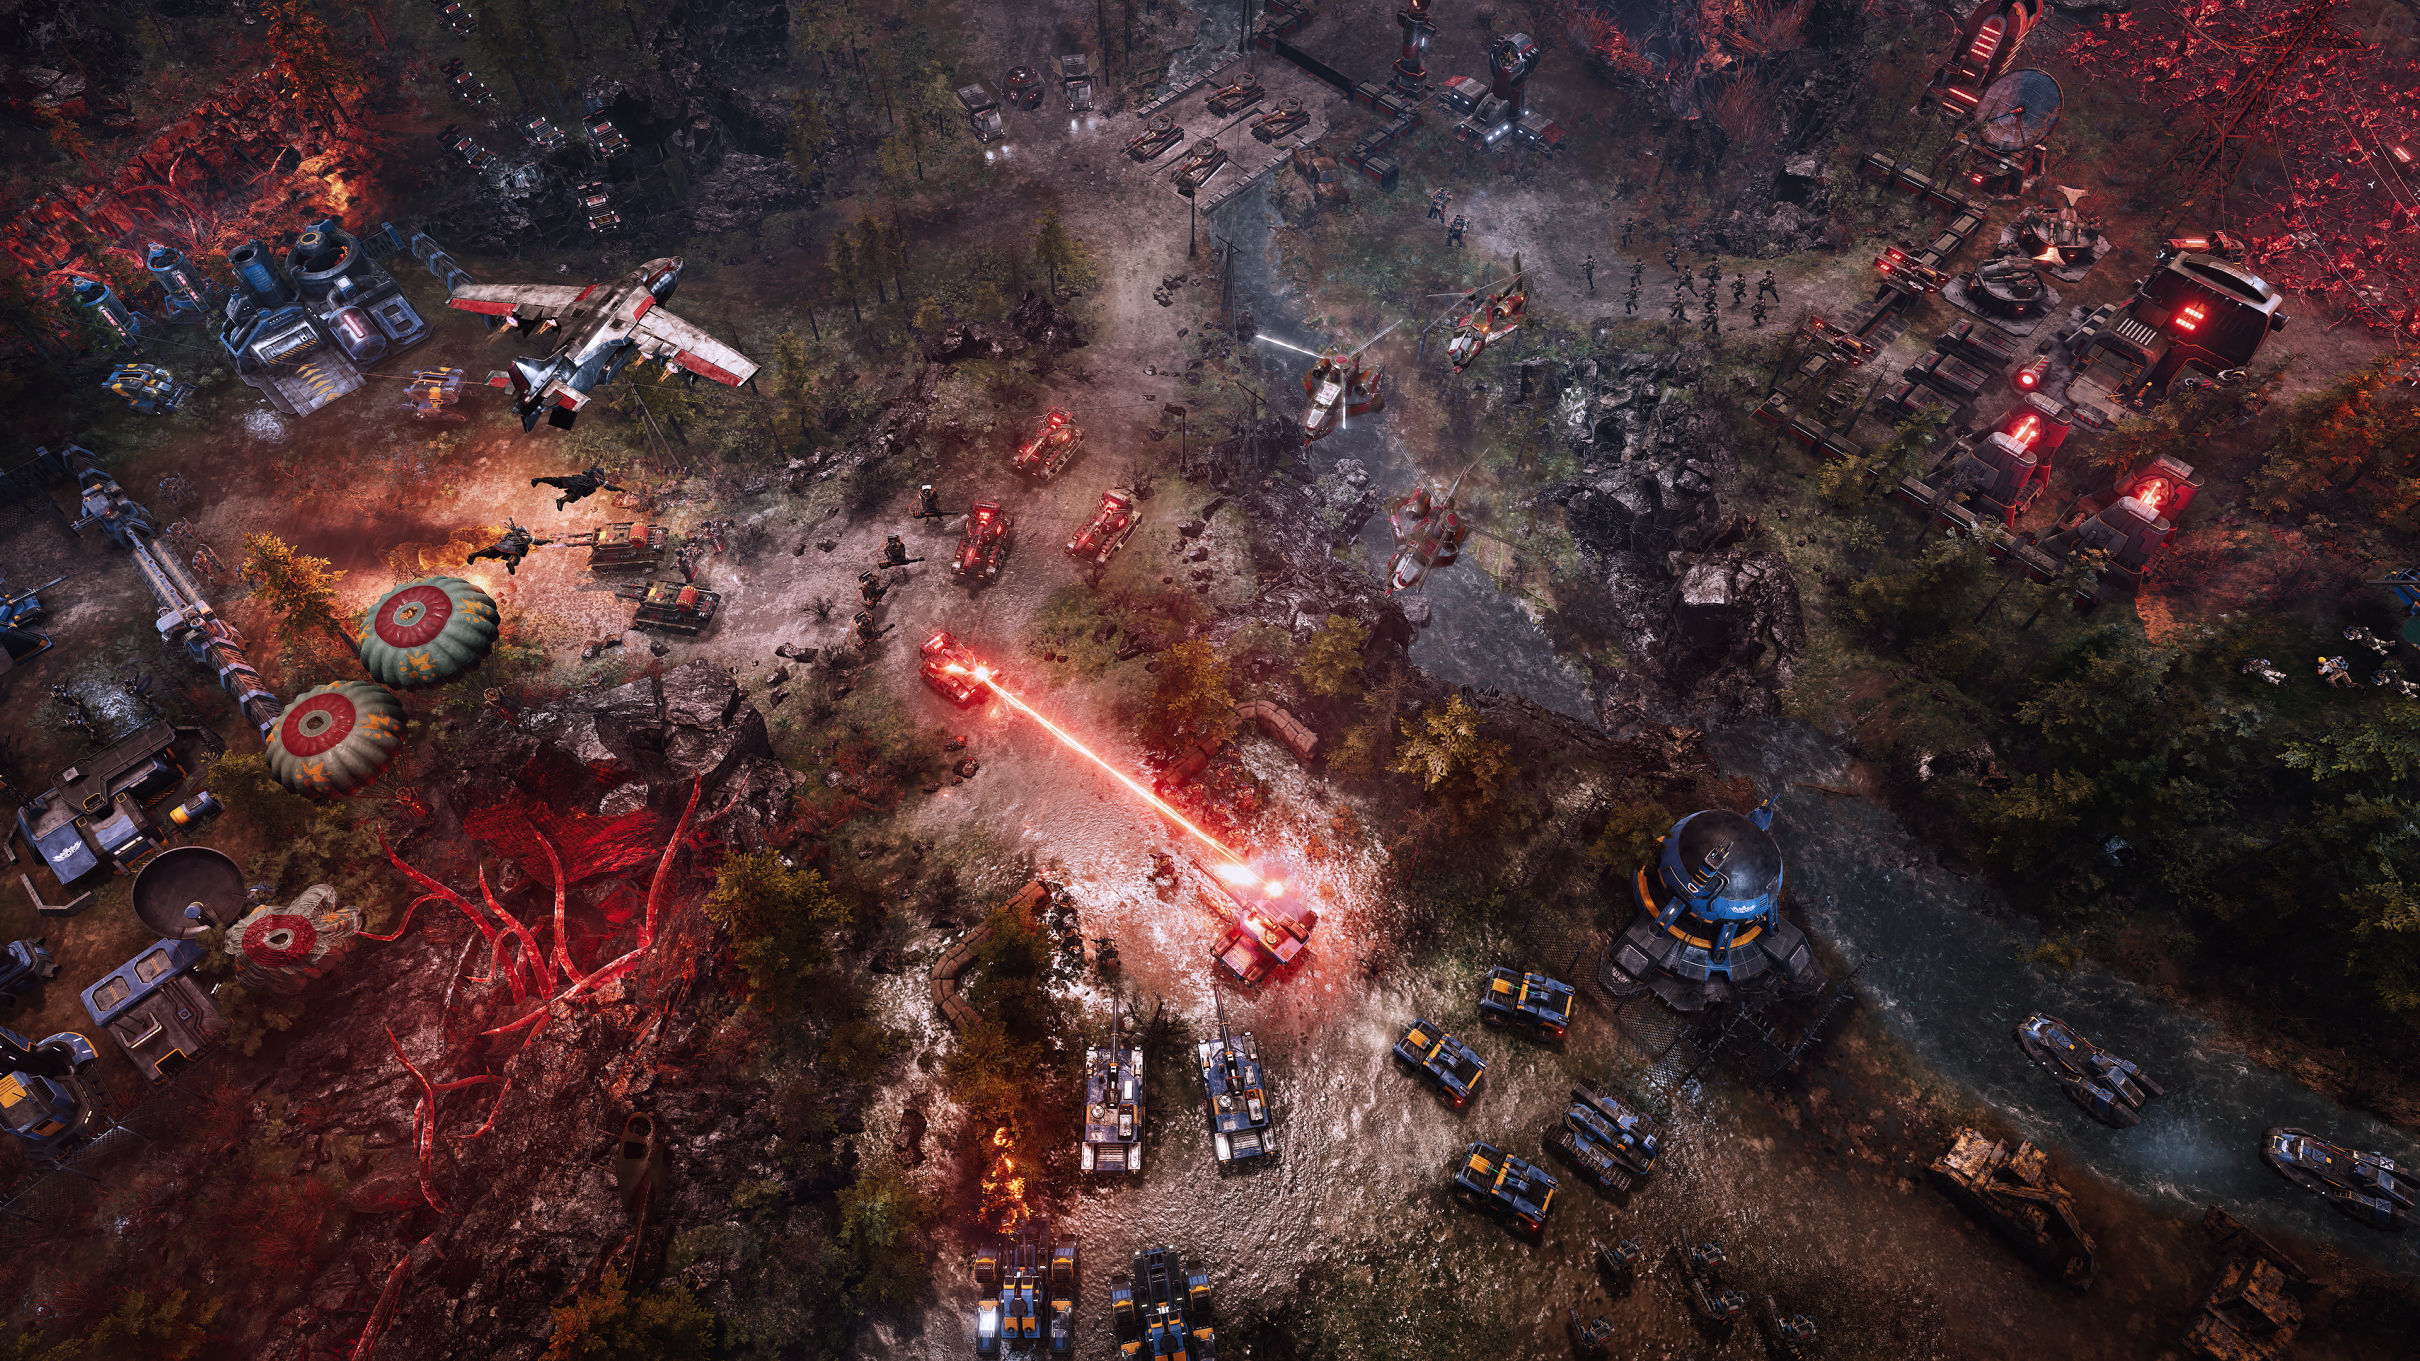 Classic-style RTS Tempest Rising hits in 2023